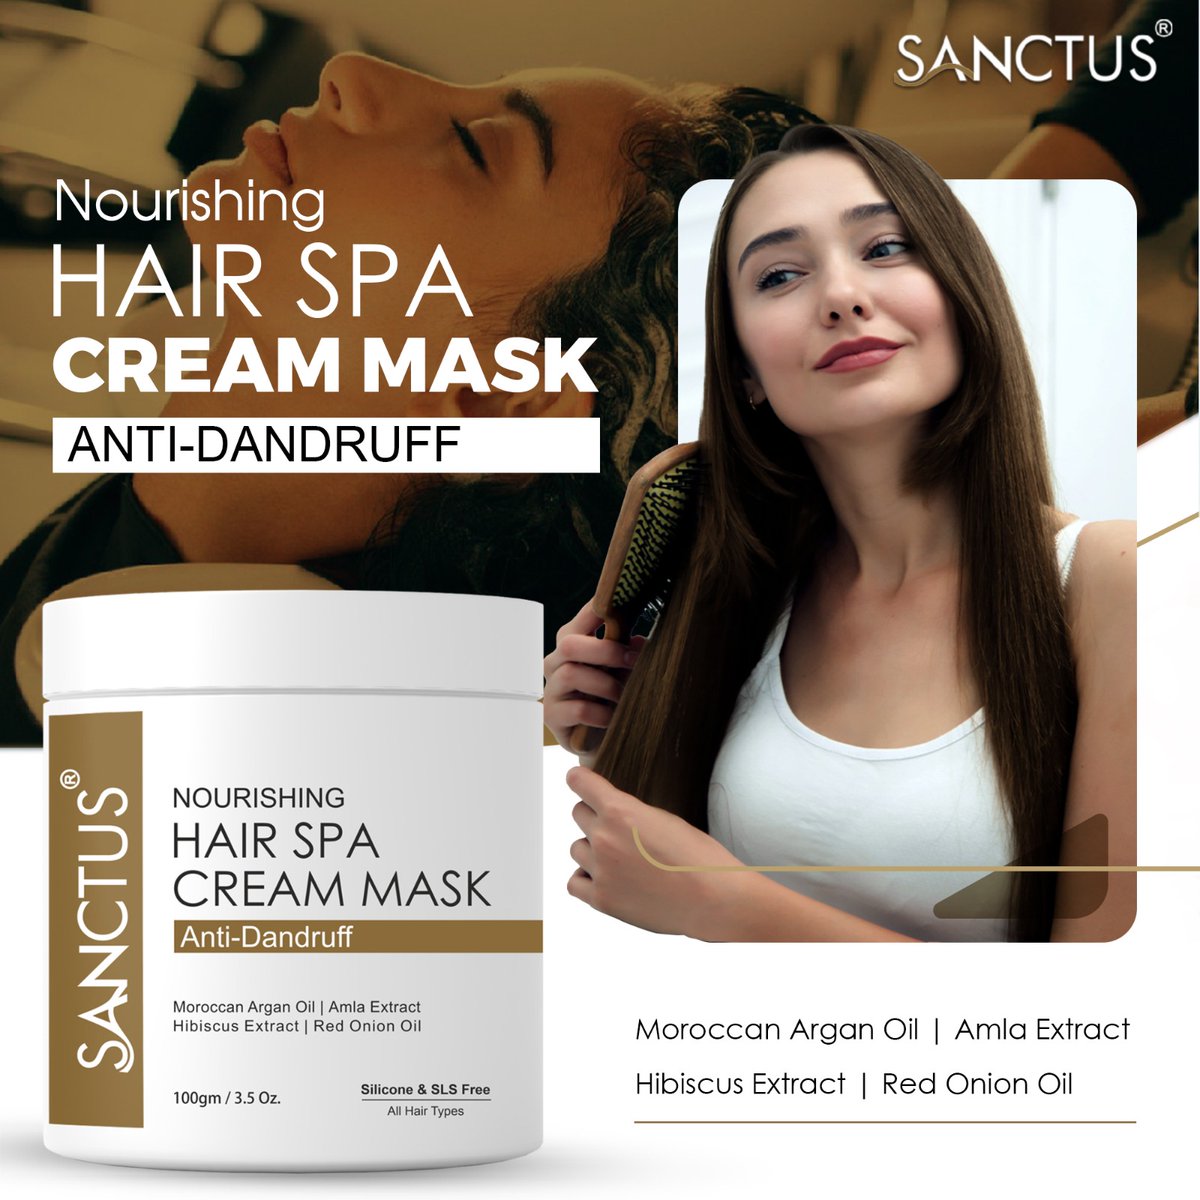 ✨Embrace the power of nature with Sanctus! 🌿 Our Nourishing Hair Spa Cream Mask is your ticket to an anti-dandruff hair revolution. Revel in the luxury of organic care and let your hair shine!  #SanctusHairCare #DandruffFree #OrganicRevolution
Shop Now: sanctusonline.com/product/nouris…